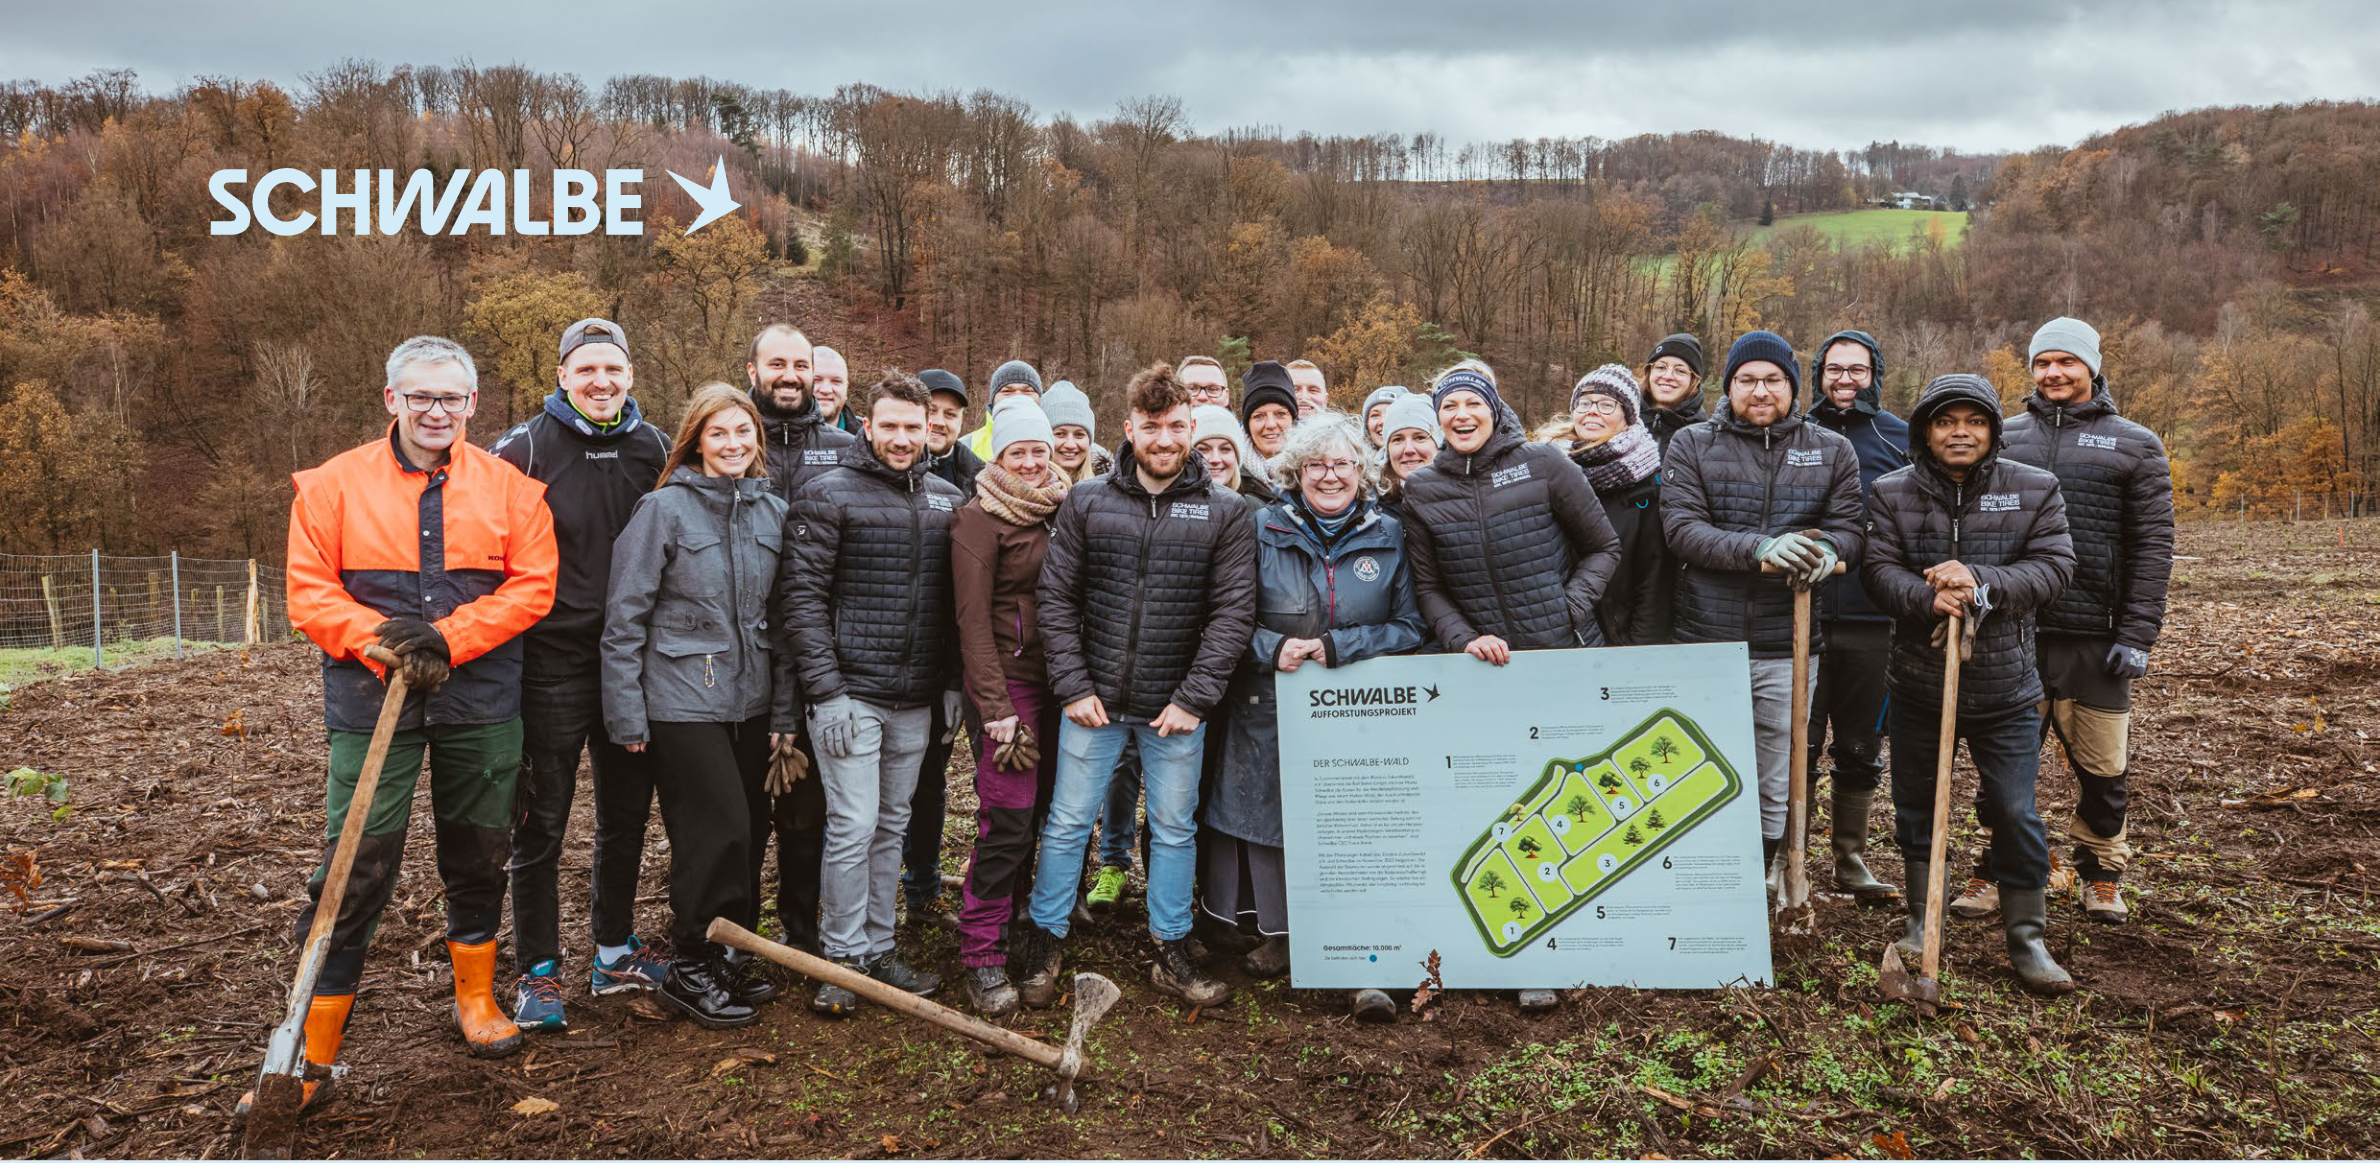 SCHWALBE LAUNCHES REFORESTATION PROJECT